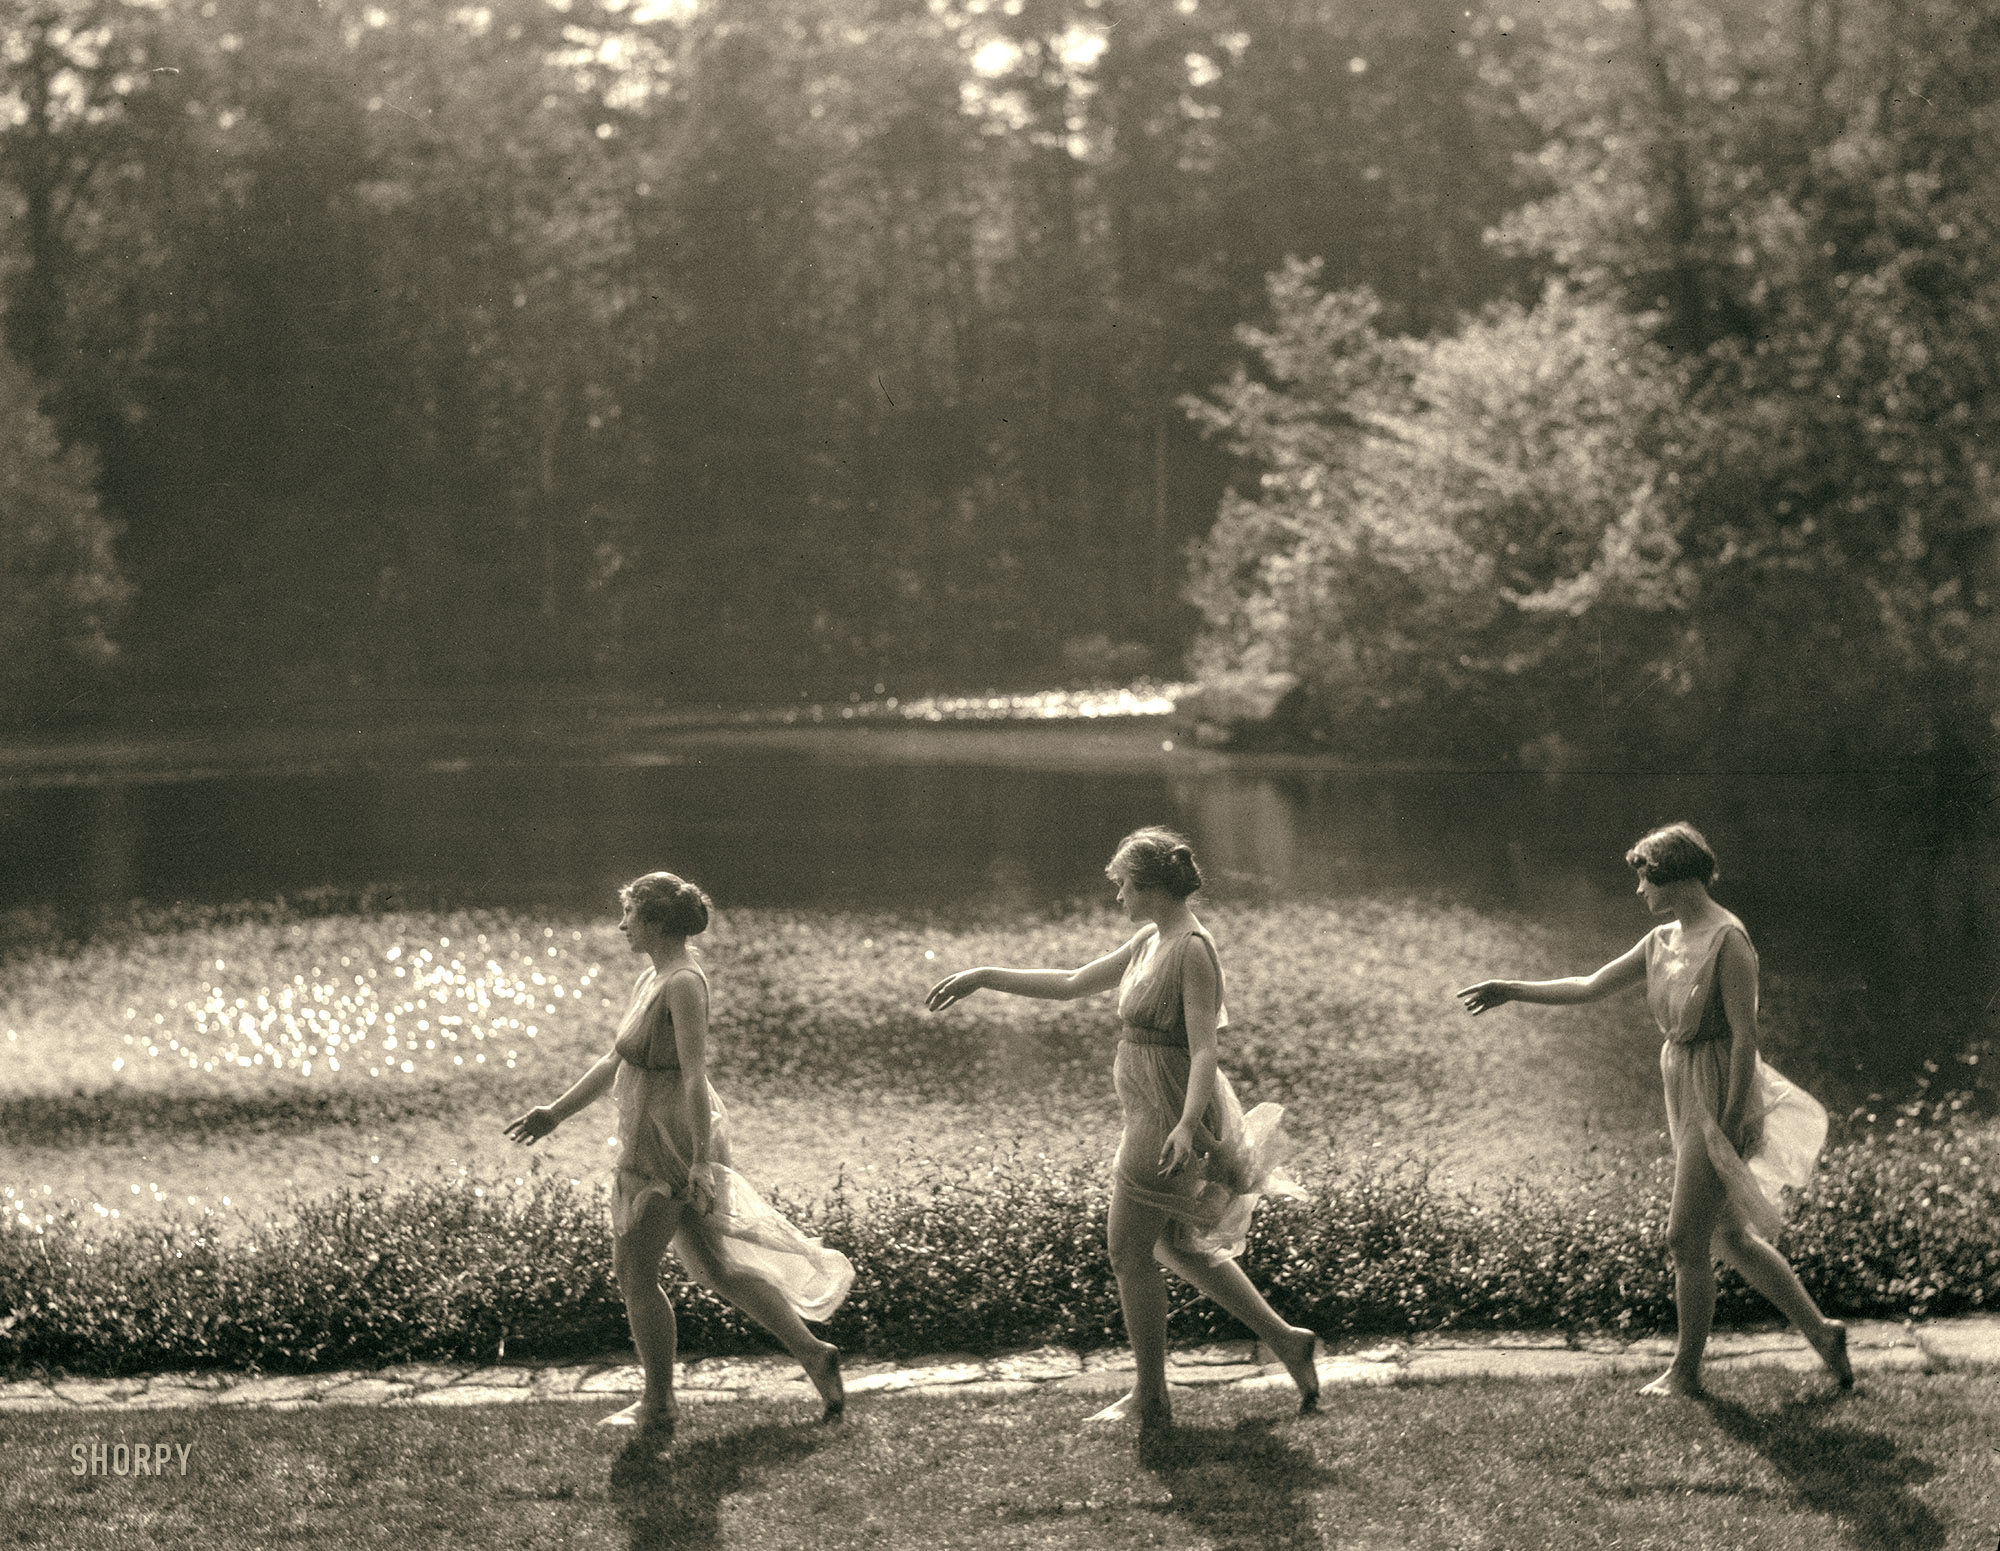 New York circa 1933. "Elizabeth Duncan dancers." Diaphanously draped, ready for a sun-dappled dip. 4x5 nitrate negative by Arnold Genthe. View full size.